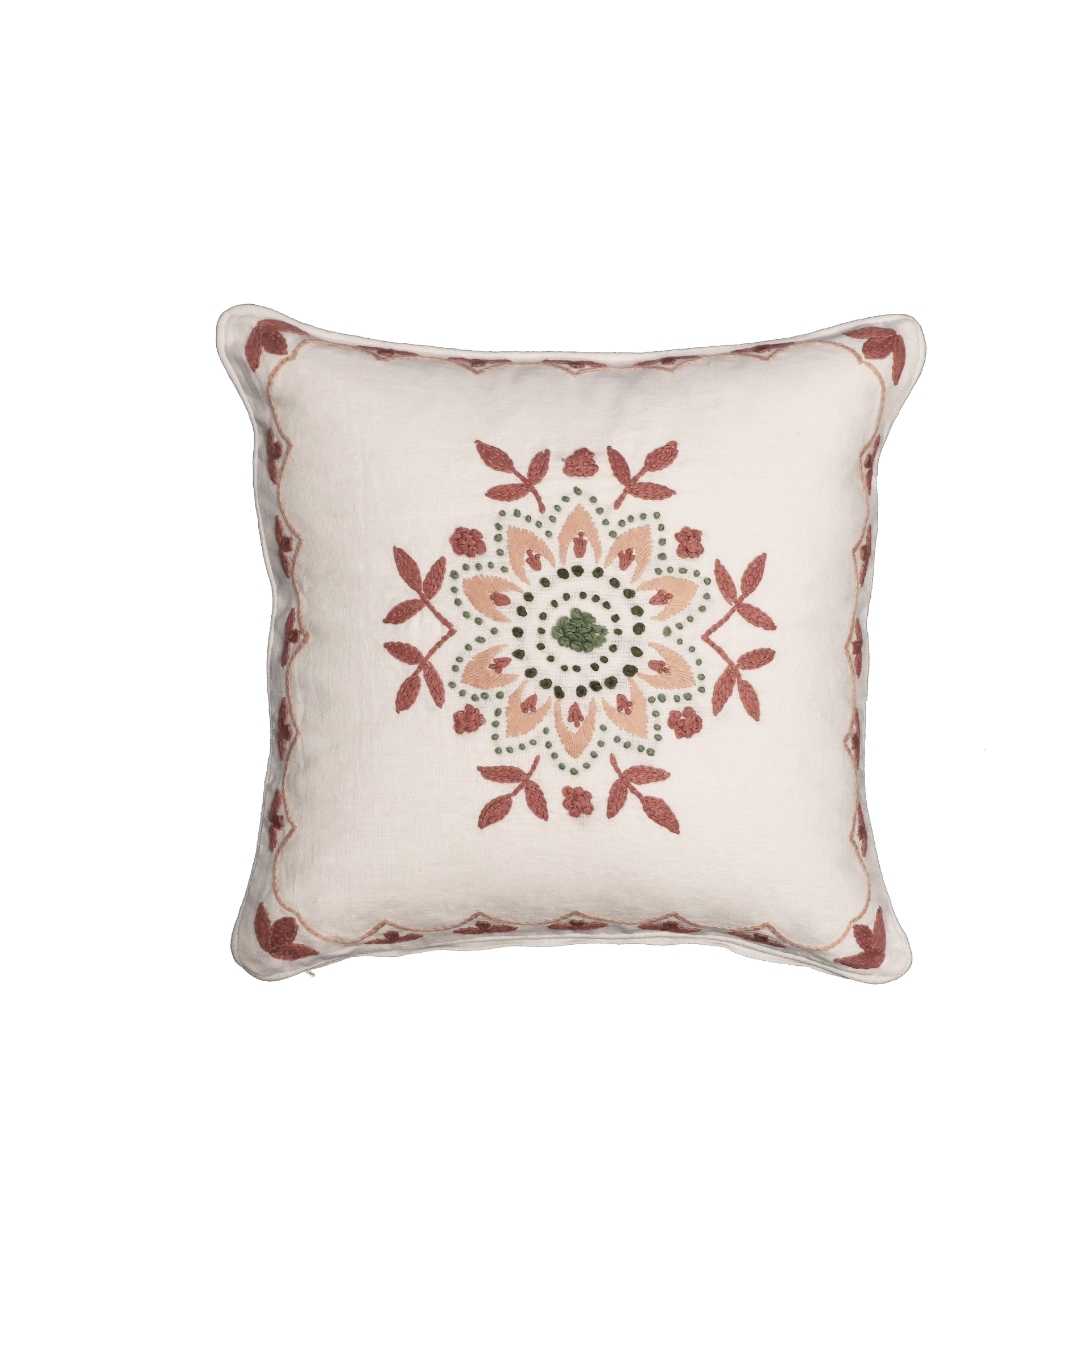 Sunflower Embroidered Cushion - Rose